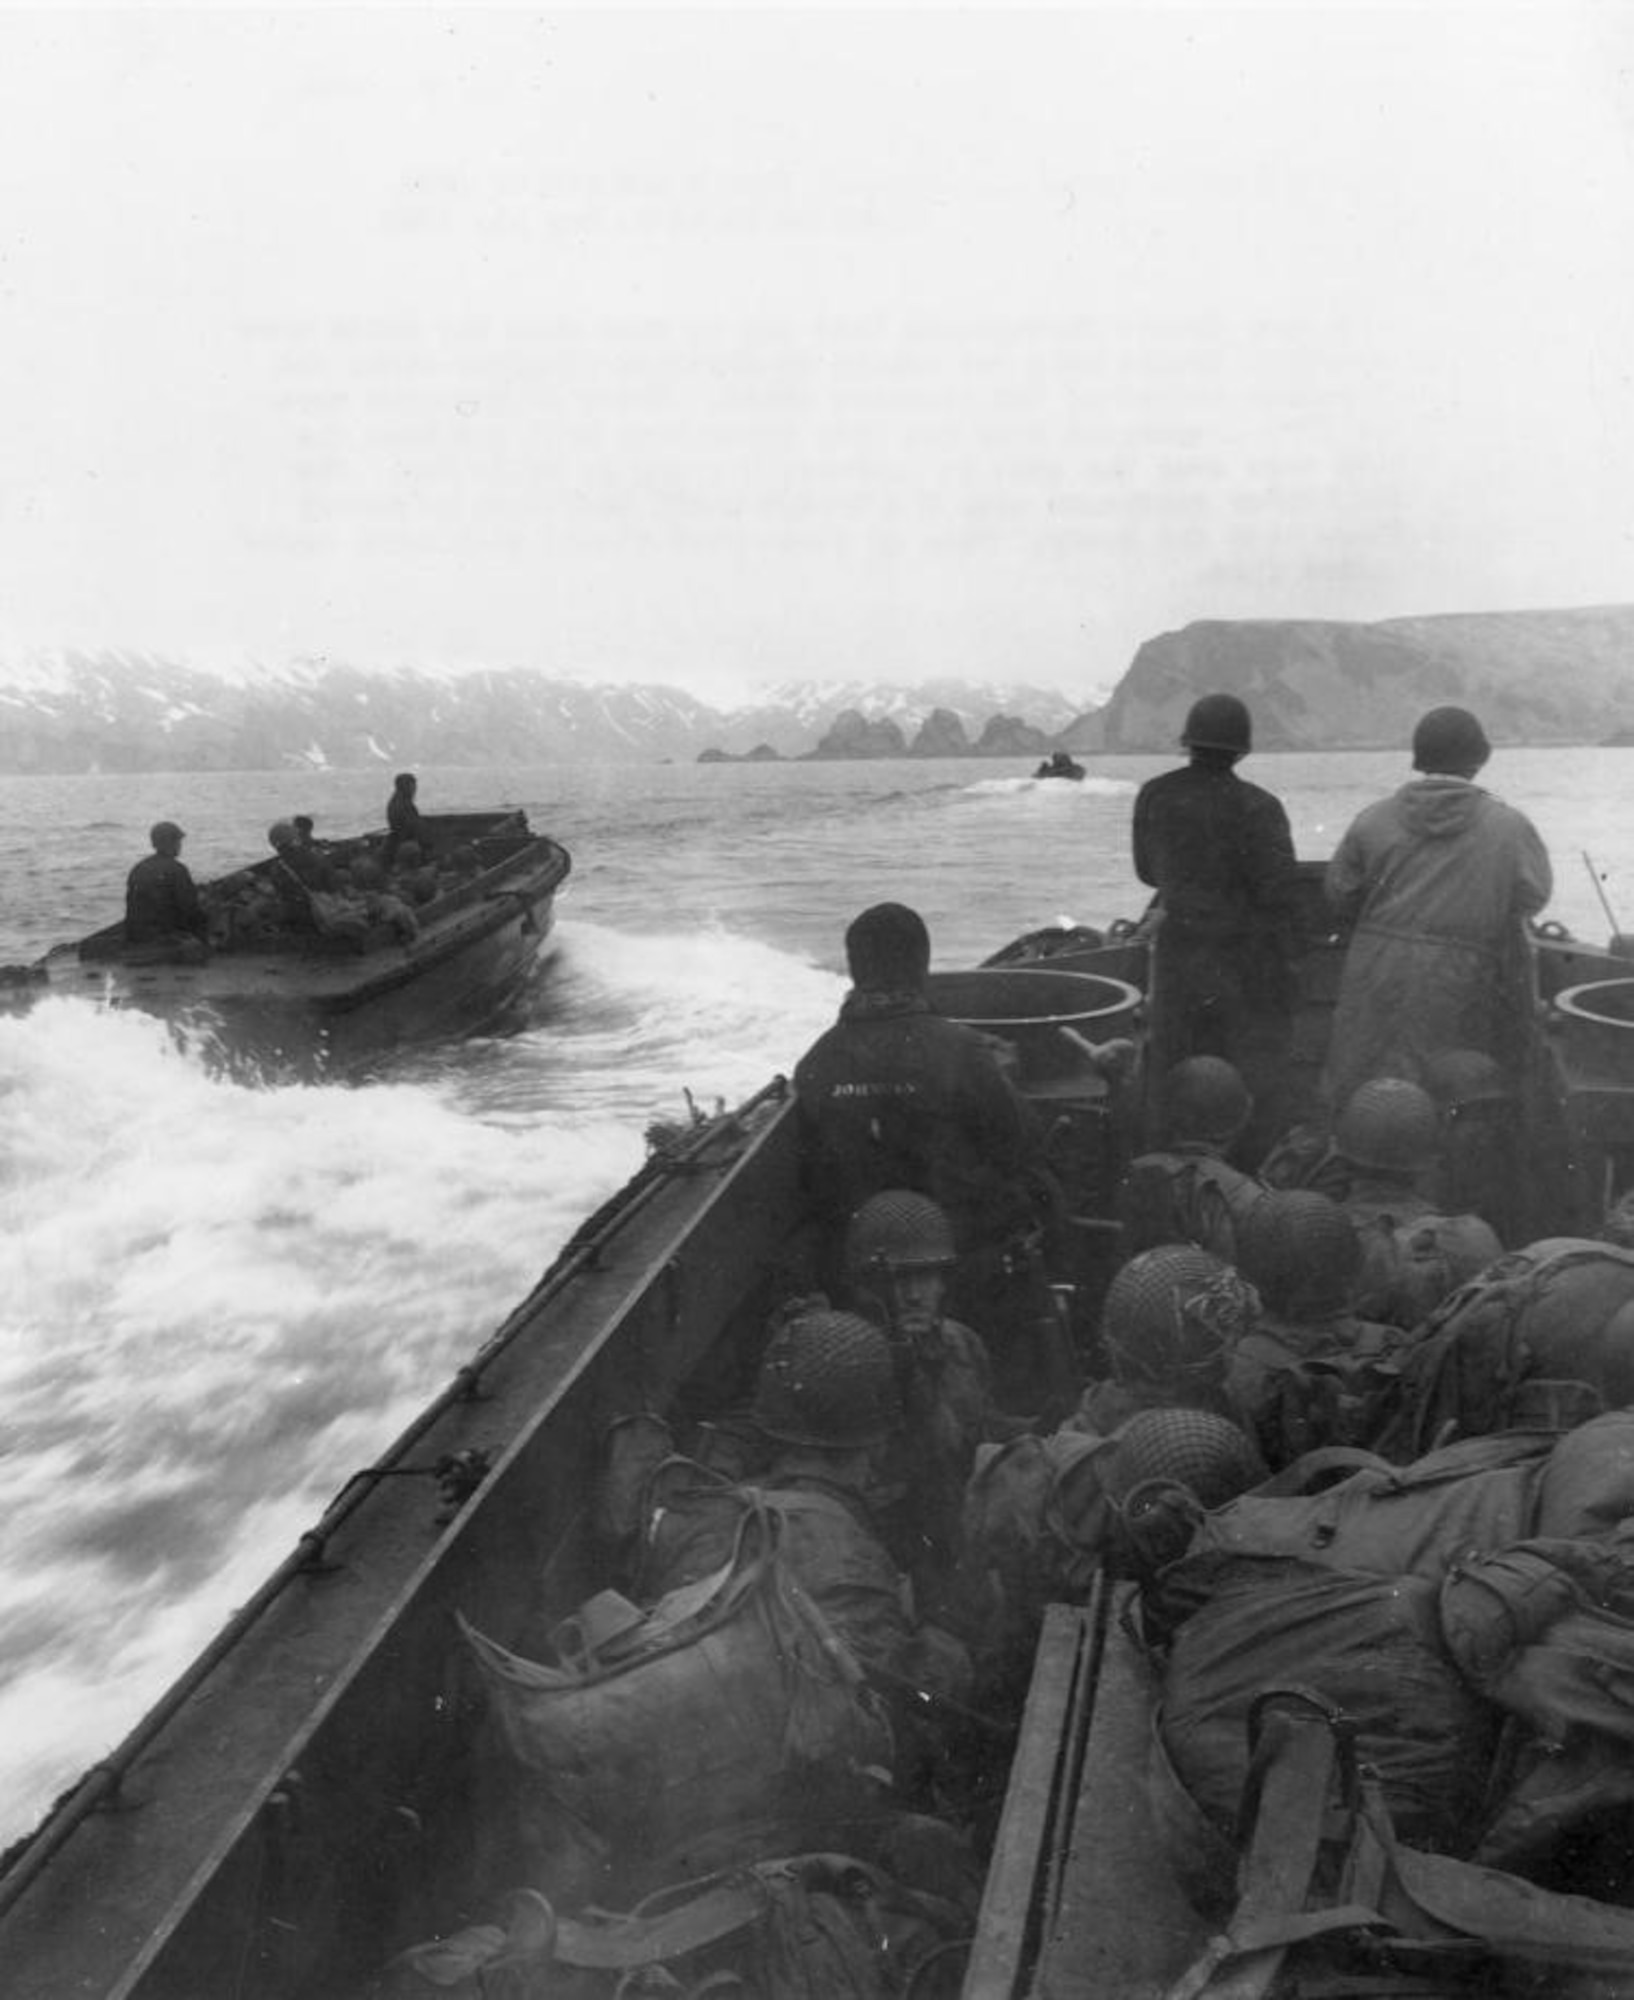 On May 11, 1943, American troops invaded Japanese-occupied Attu Island, now part of Alaska. Fearing a Russian invasion, the FBI and OSI went on to train island residents. (Associated Press photo)